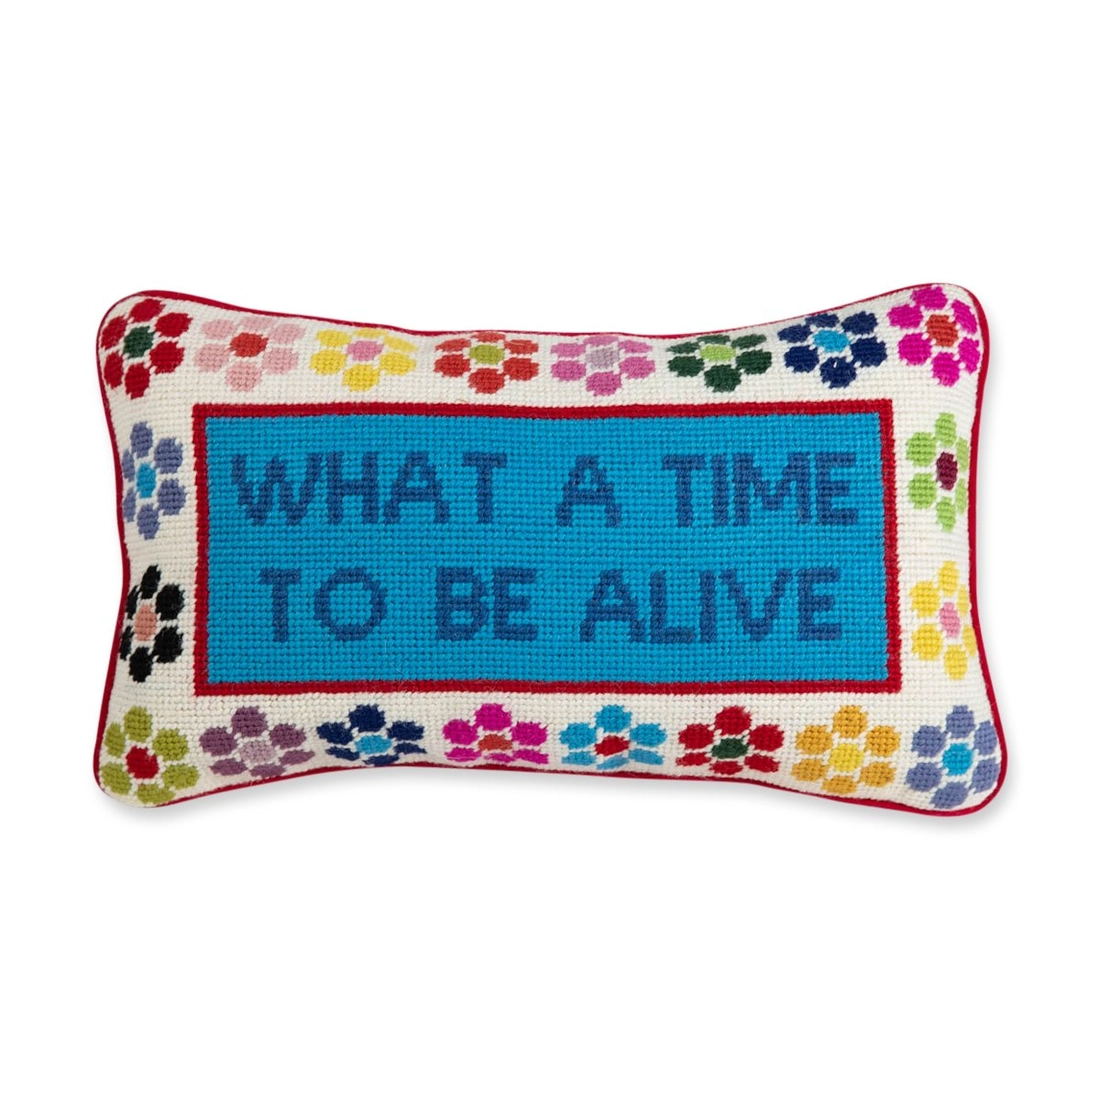 "What a time to be alive" needlepoint pillow